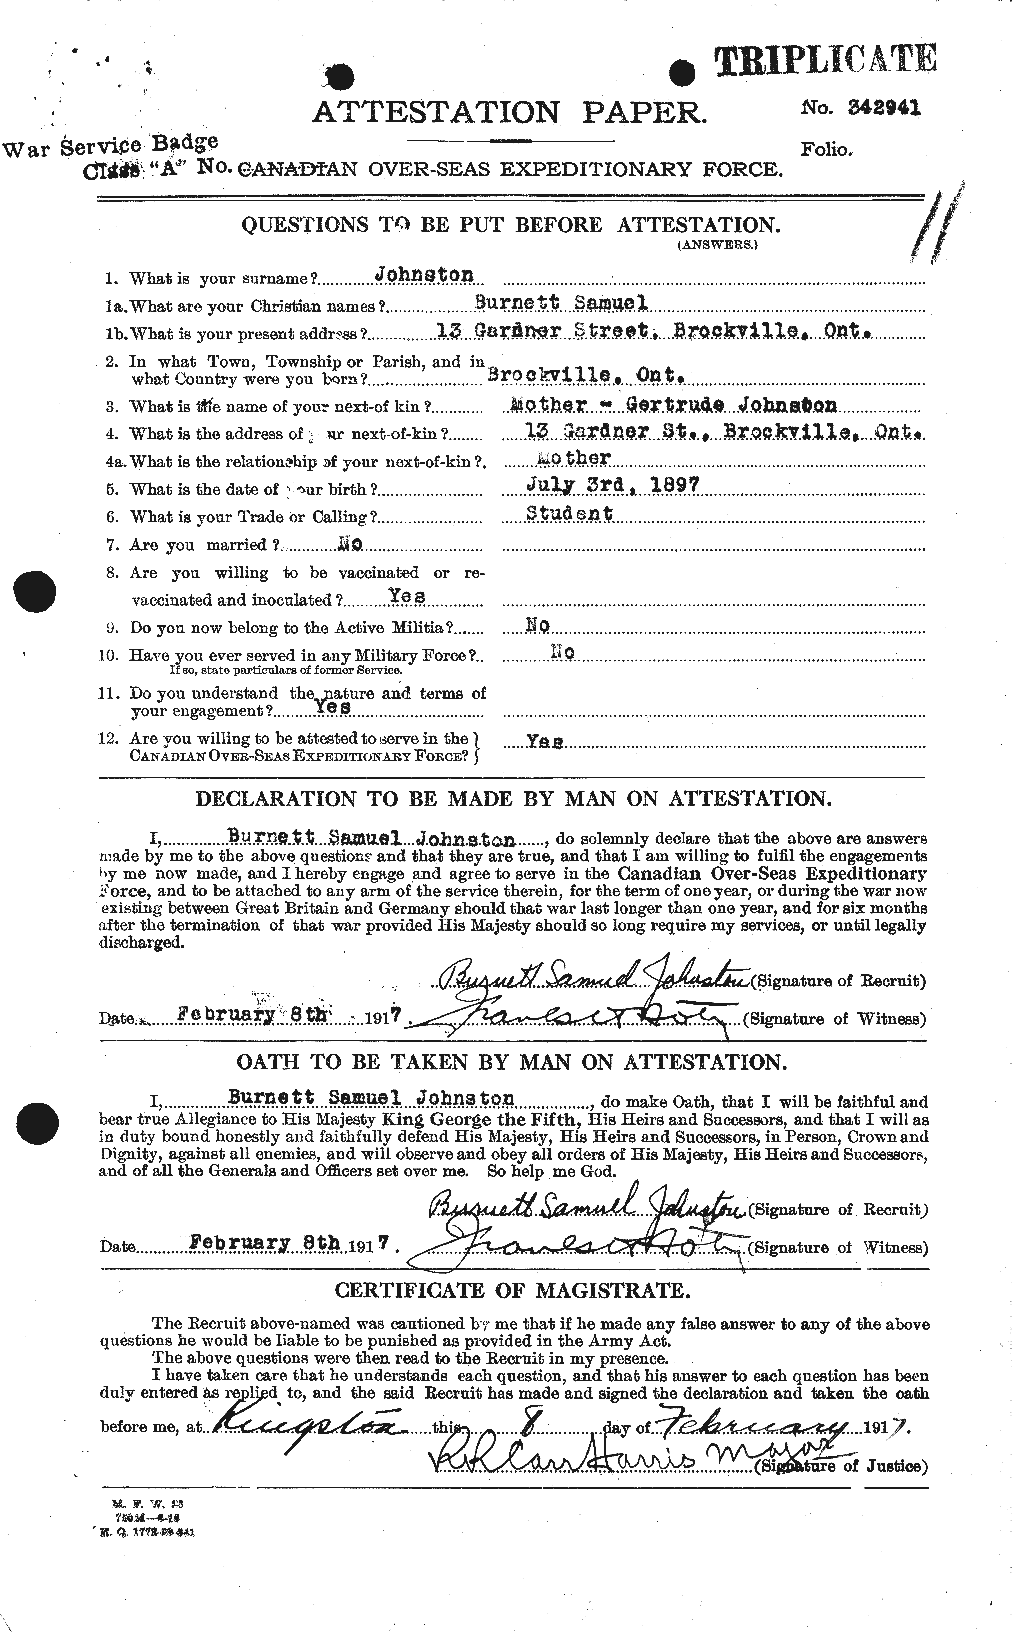 Personnel Records of the First World War - CEF 421084a